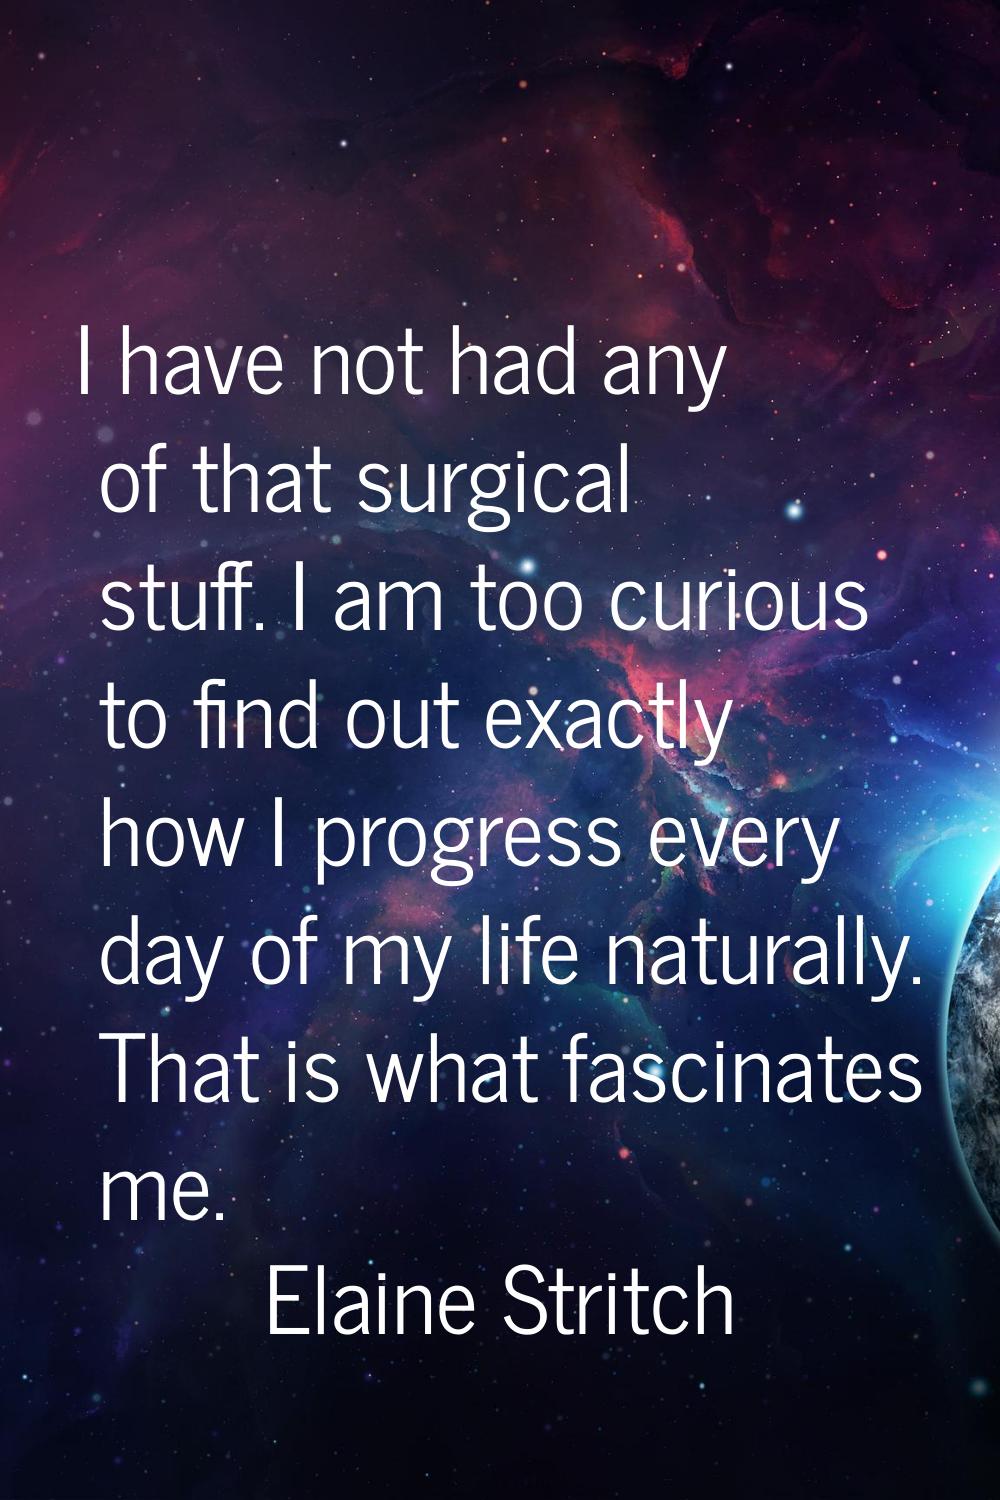 I have not had any of that surgical stuff. I am too curious to find out exactly how I progress ever